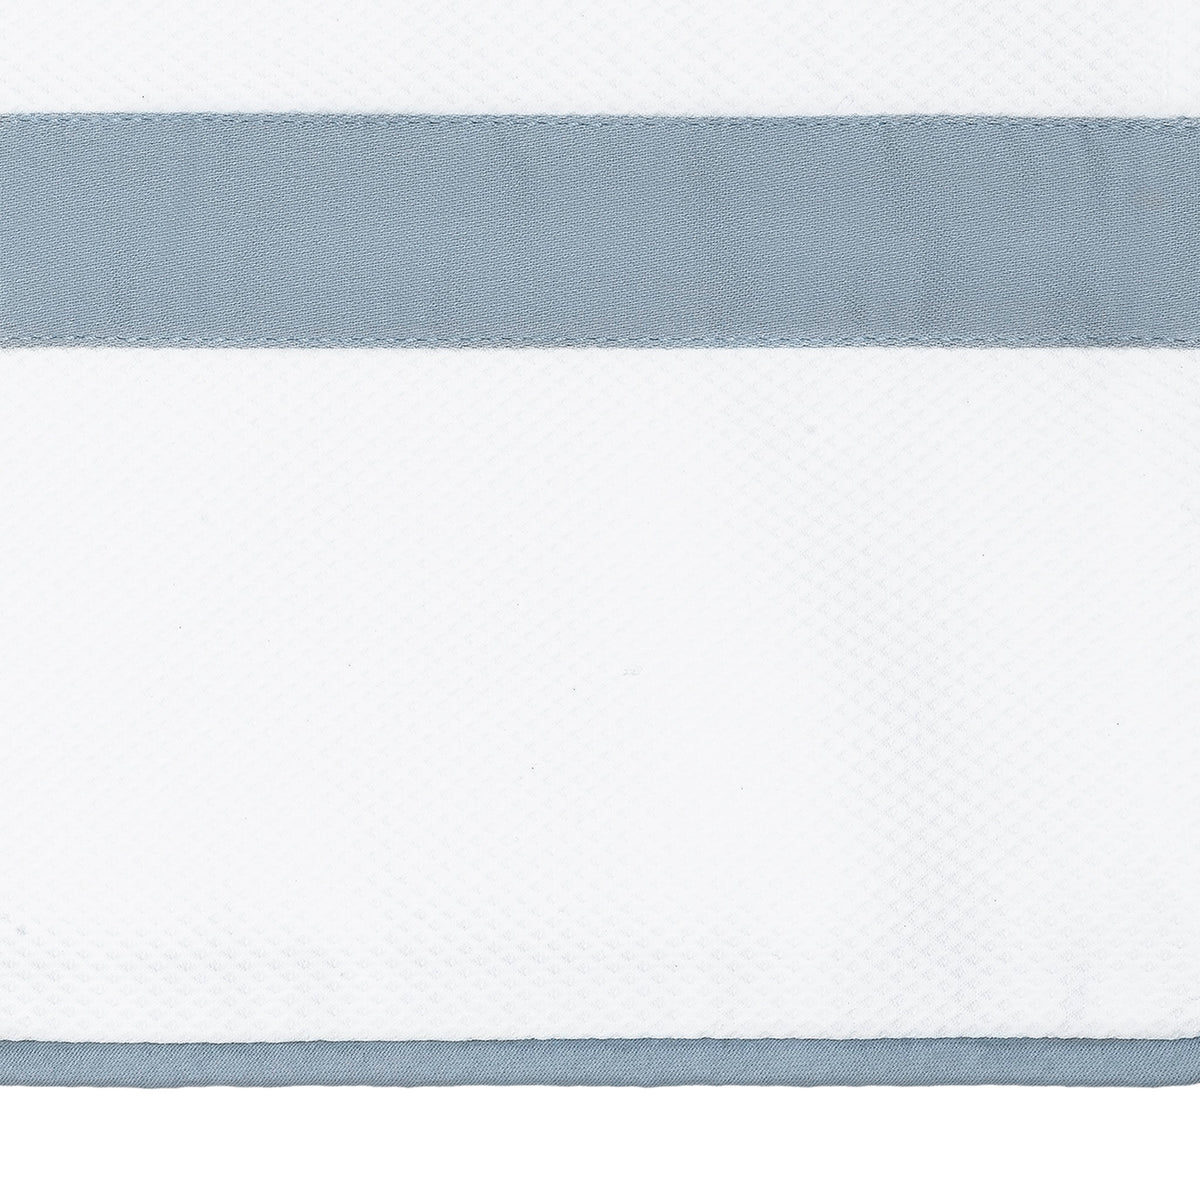 Swatch Sample of Matouk Louise Pique Bedding in Color Hazy Blue